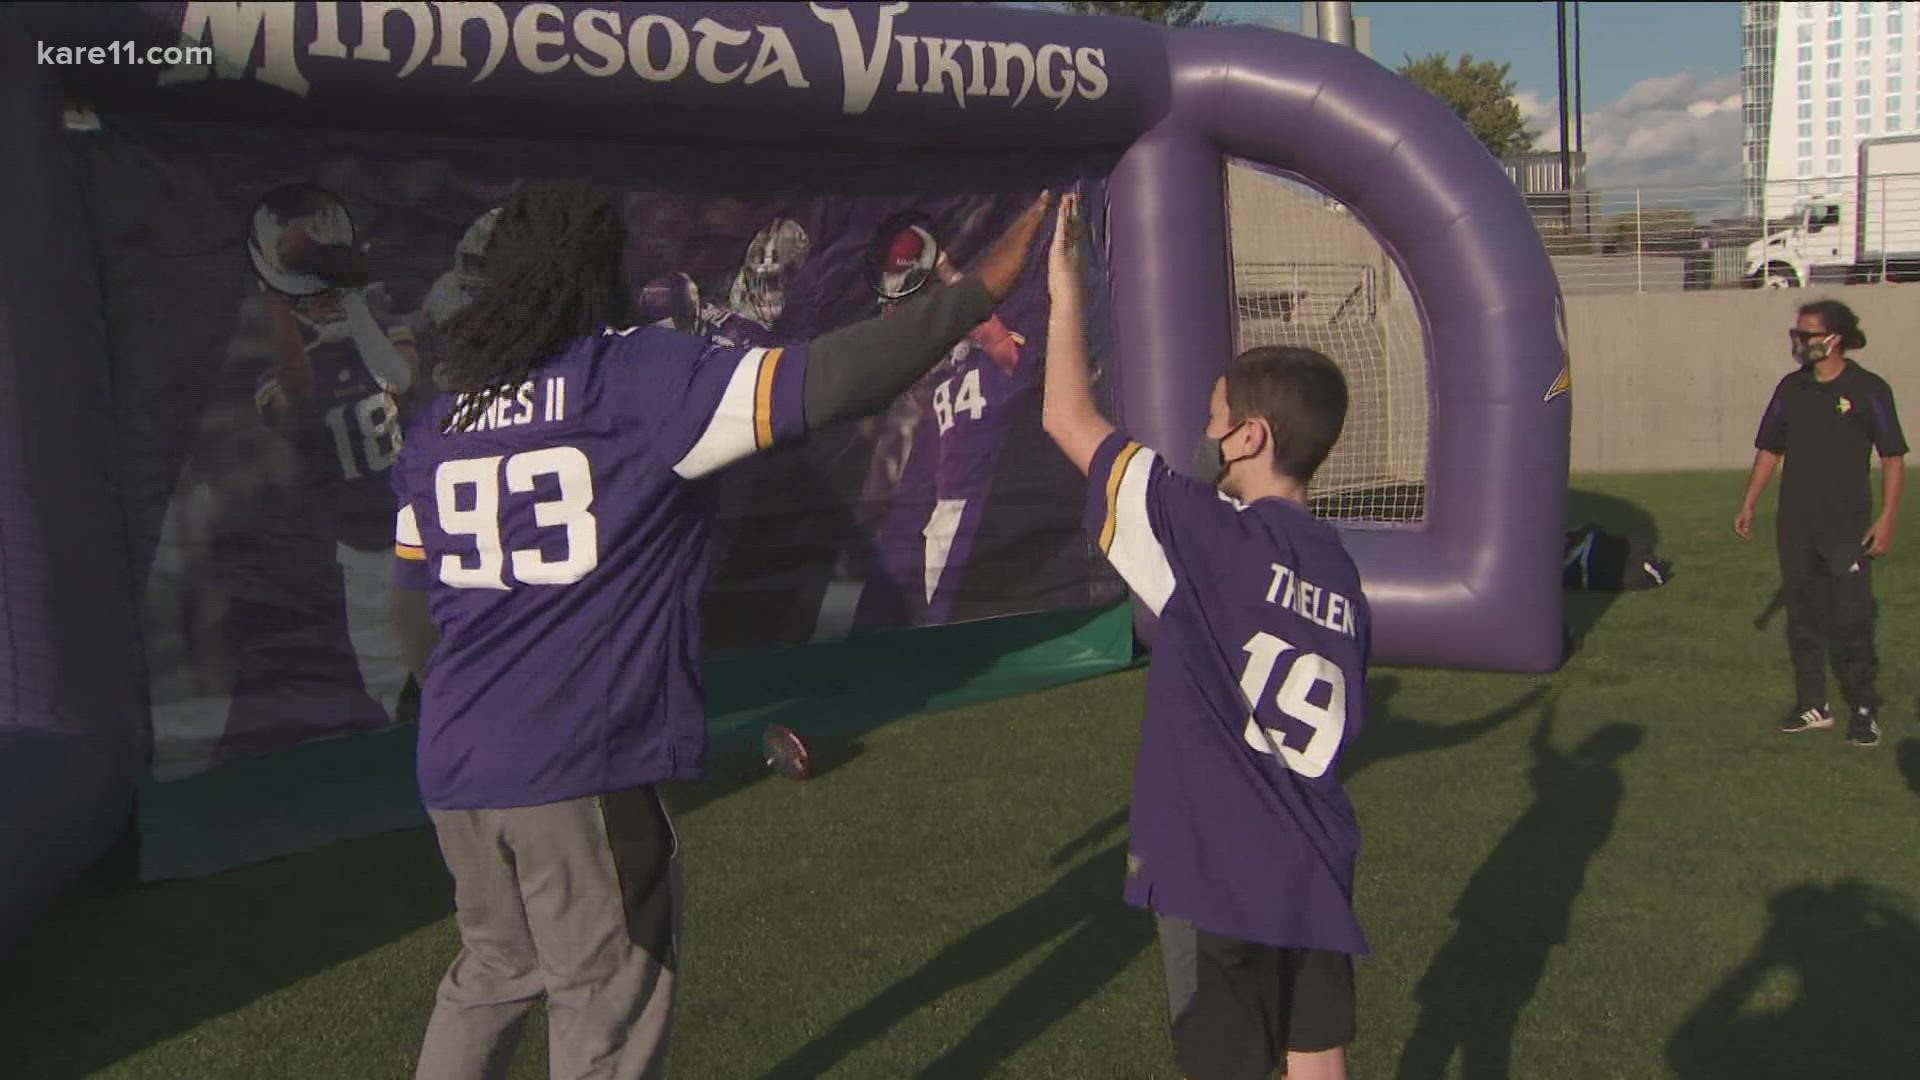 The Vikings teamed up with Shriner's Children's Hospital to provide the experience for current and former patients.